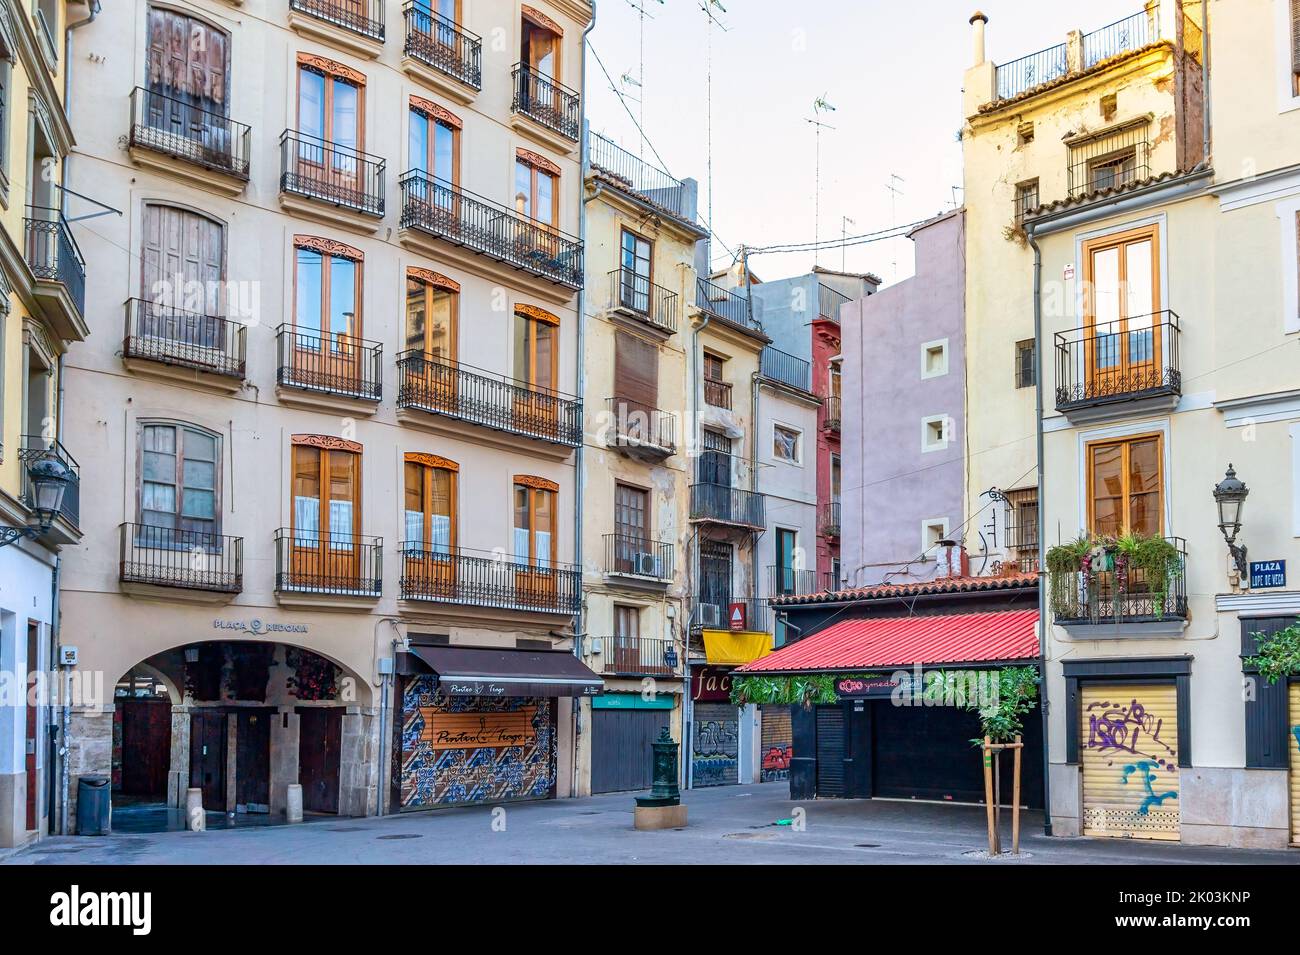 Small business and buildings during morning hours in Valencia, Spain Stock Photo